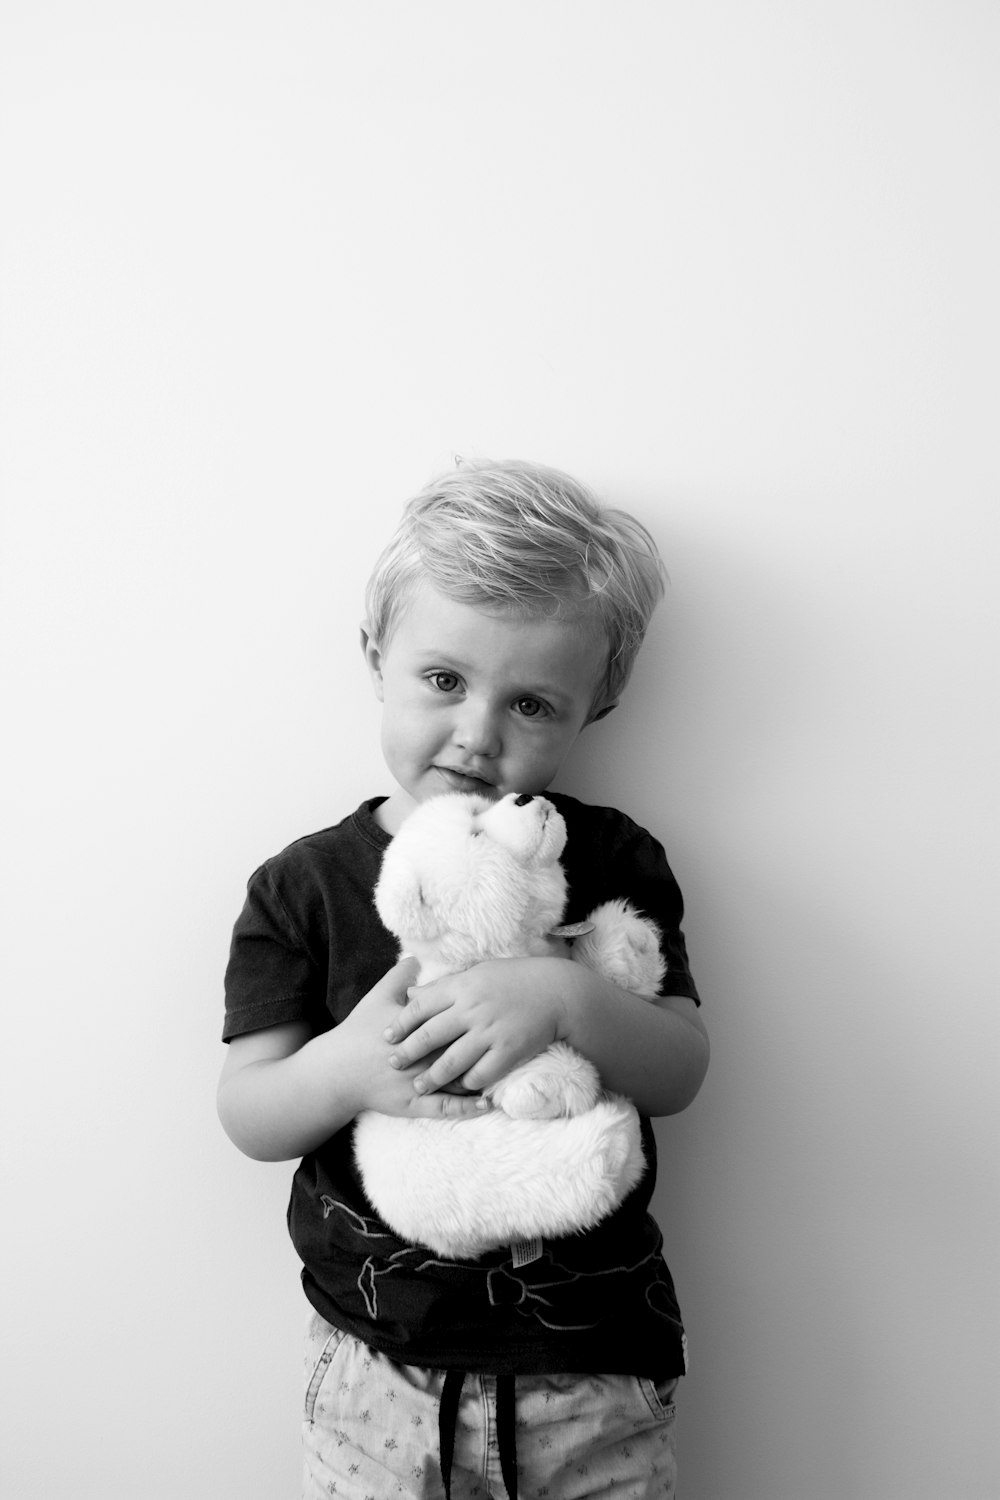 grayscale photography of boy holding bear plush toy